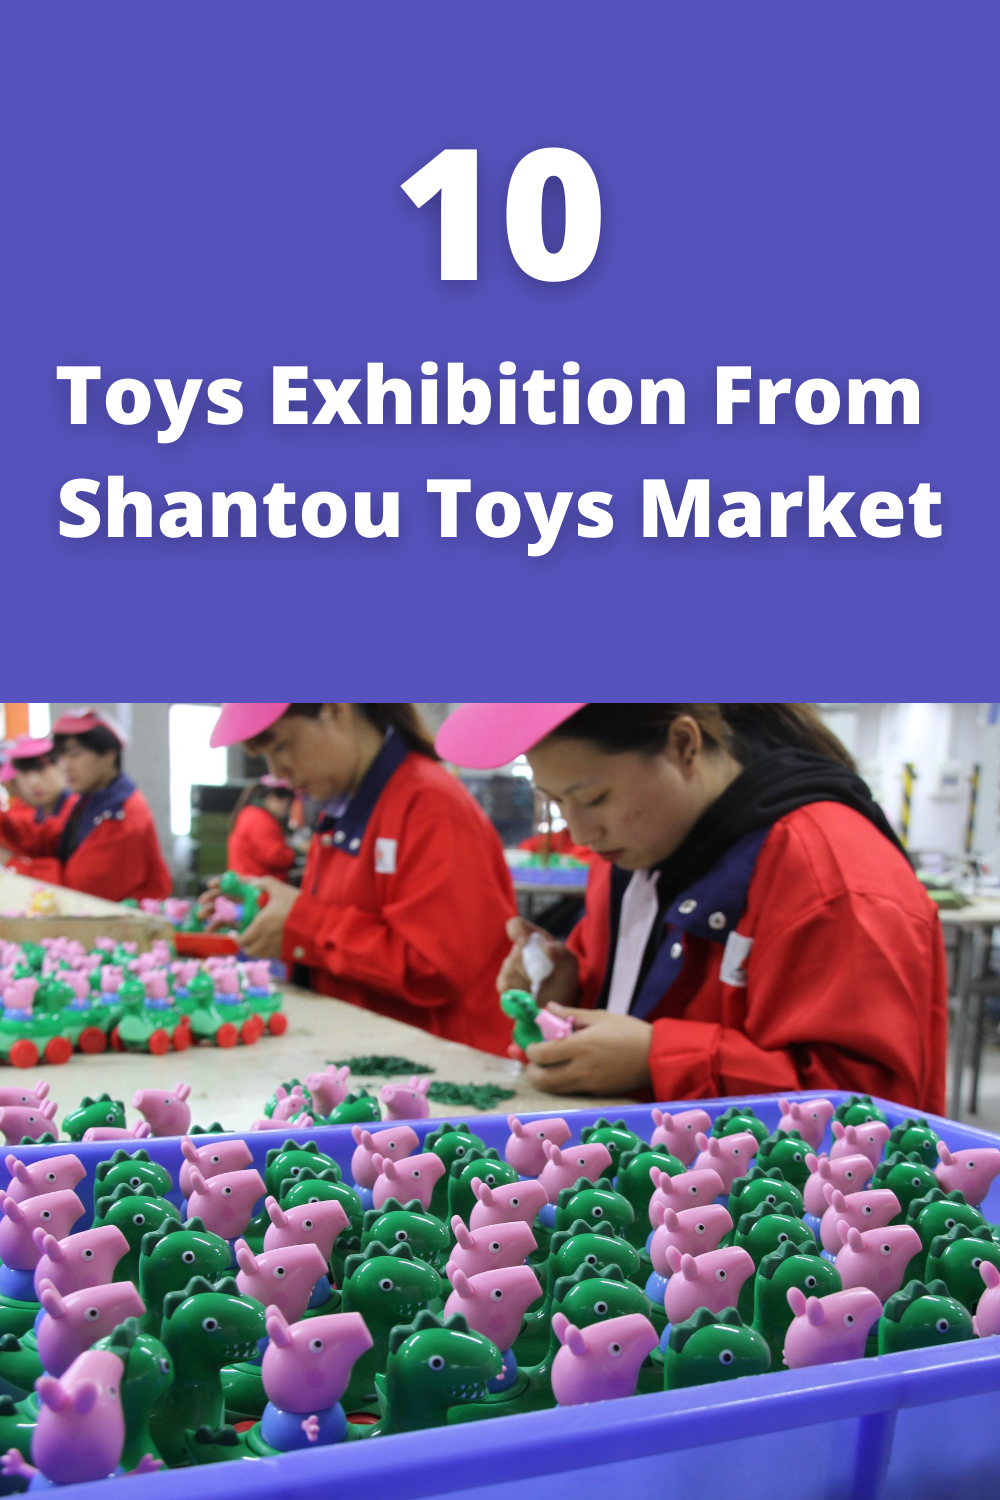 10 Toys Exhibition Must Visit If Buy From Shantou Toys Market